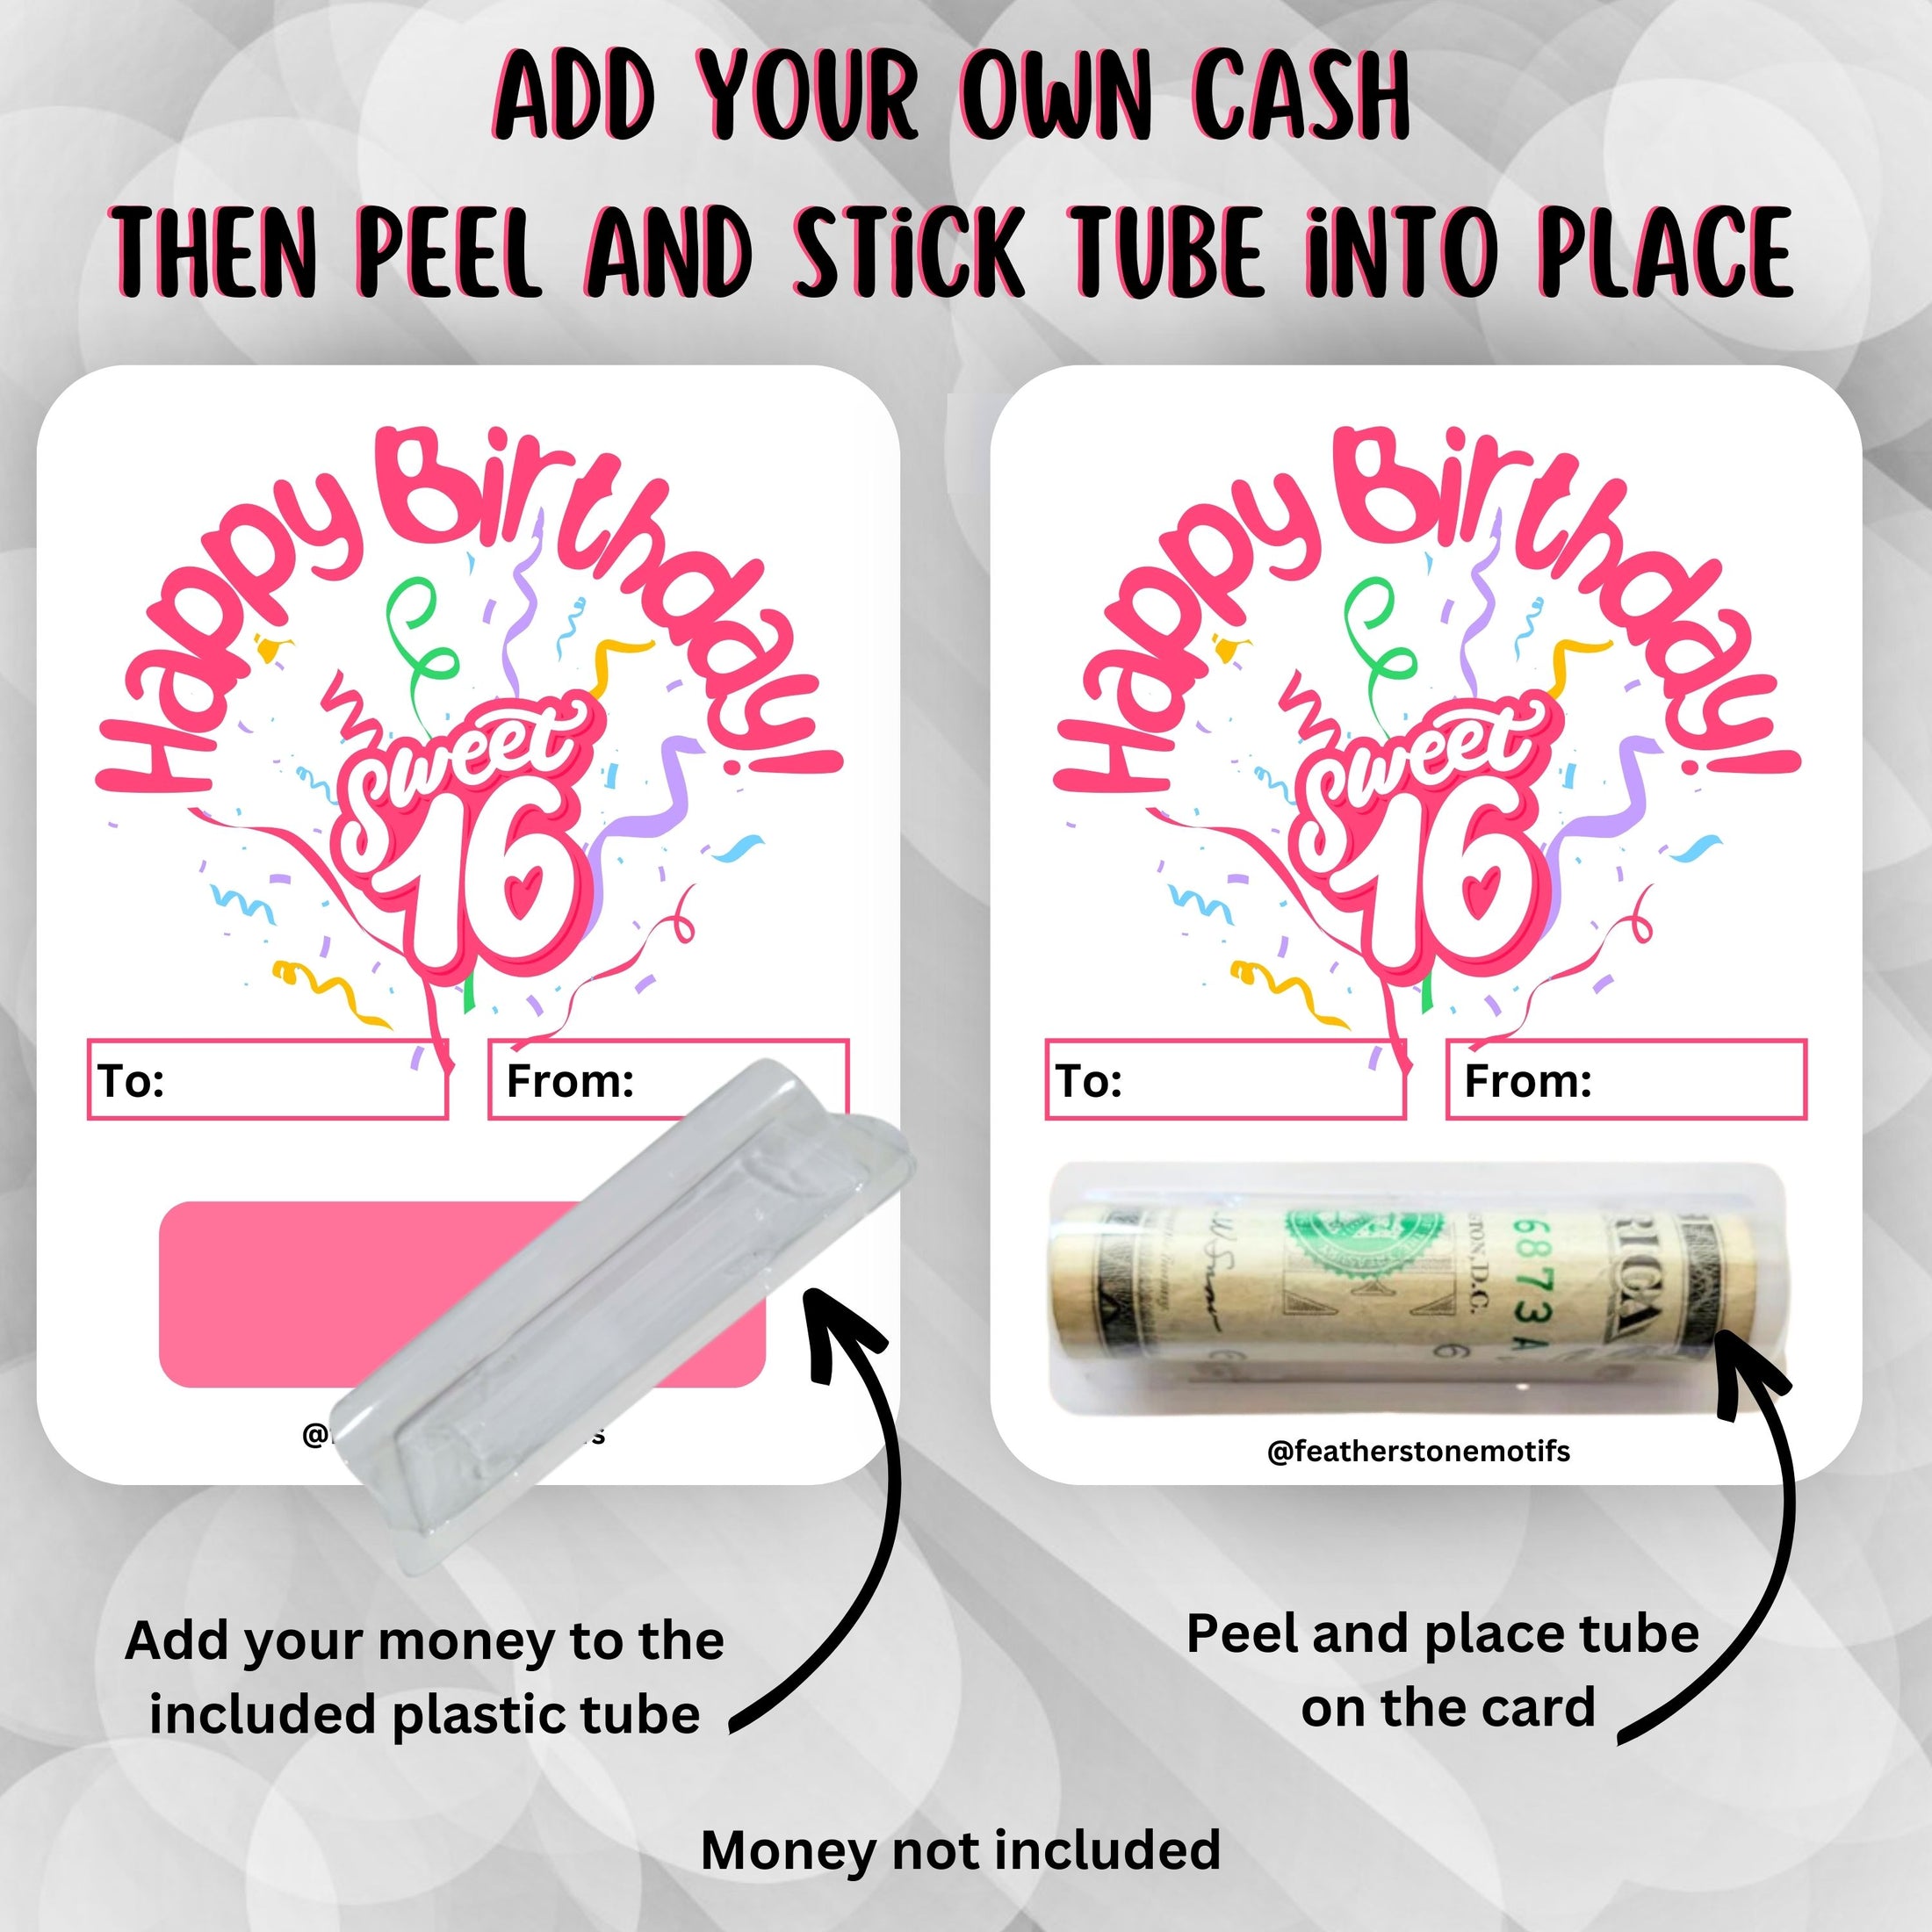 This image shows how to attach the money tube to the Sweet 16 Birthday money card.